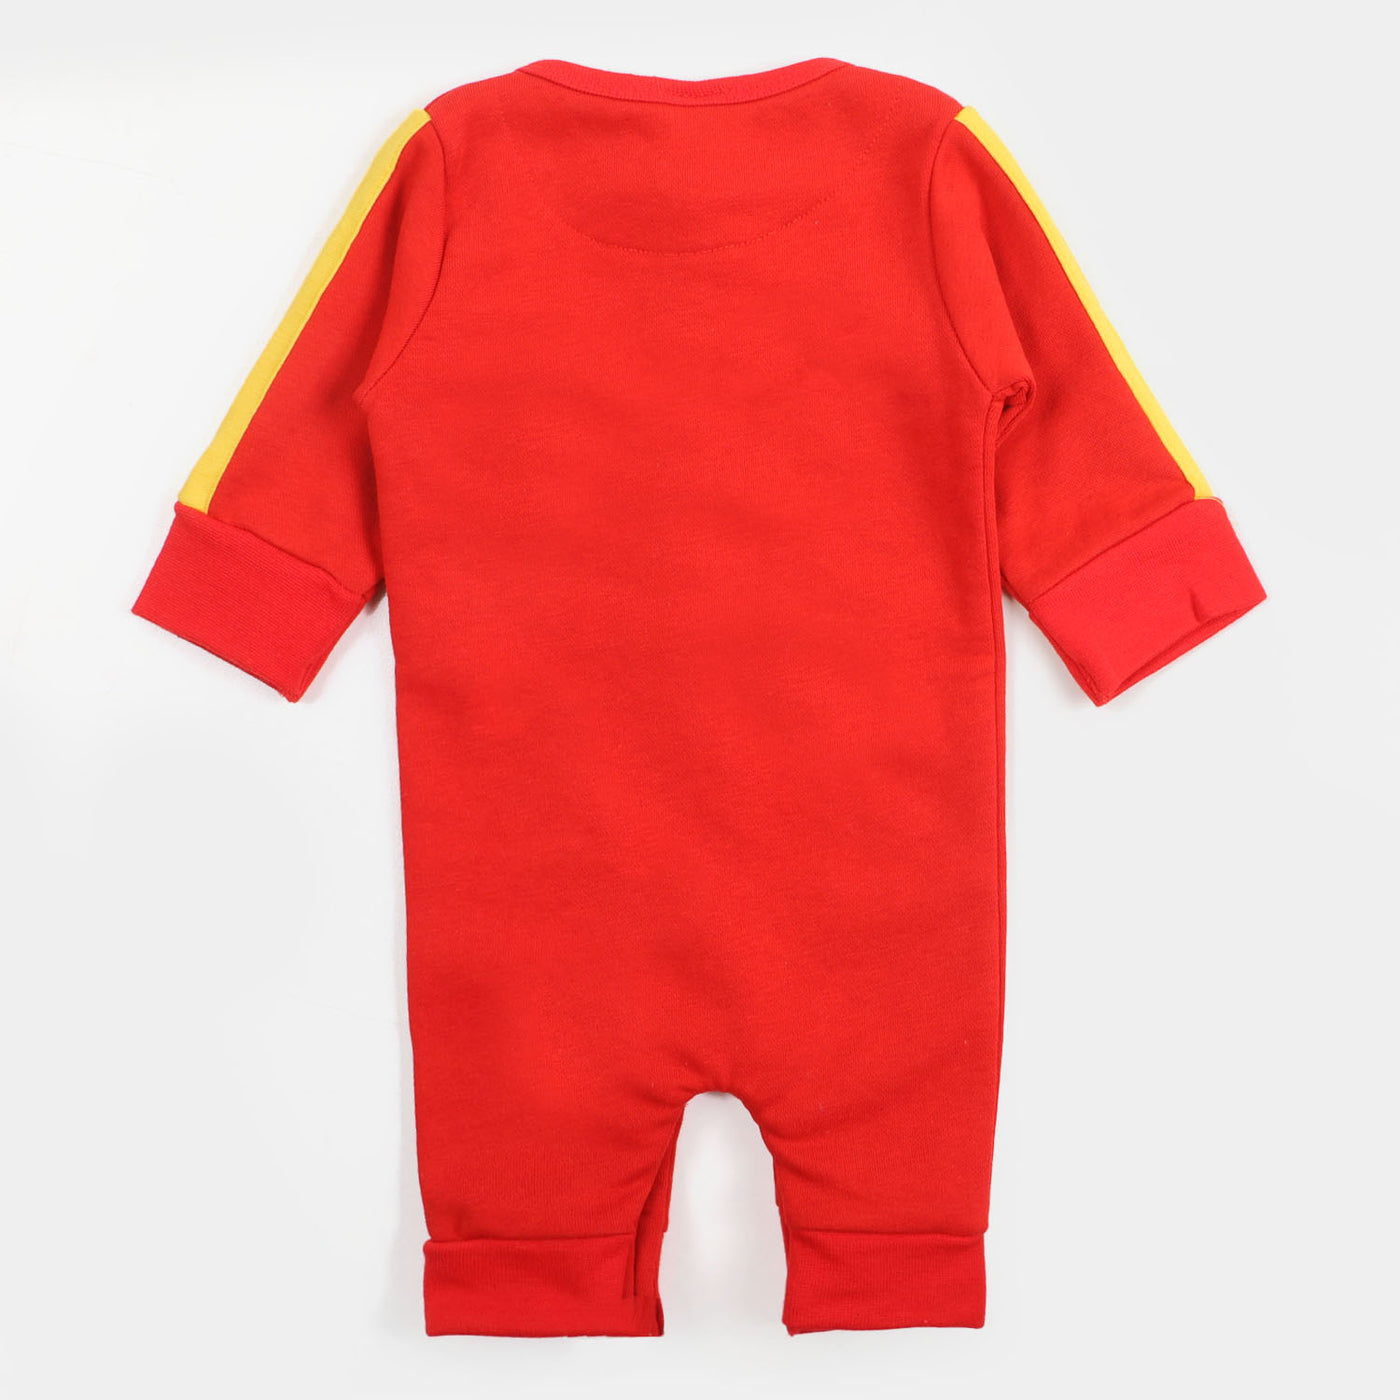 Infant Boys Knitted Romper - Red